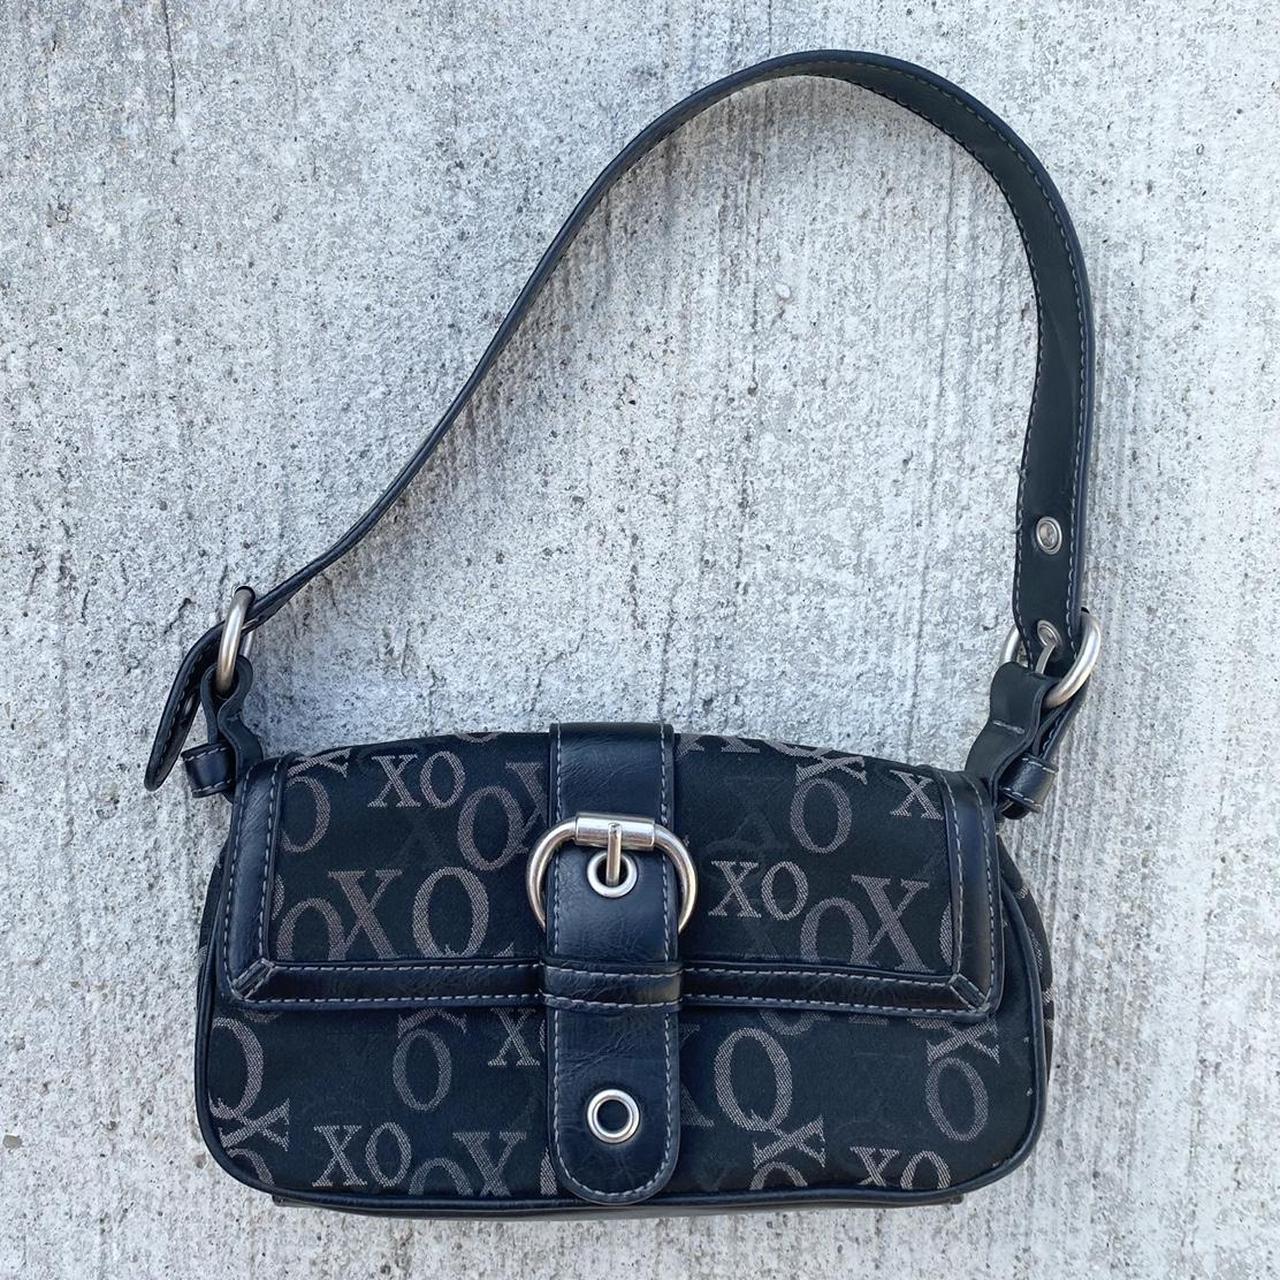 Preowned 1990 CHANEL Classic Flap micro shoulder bag - Depop